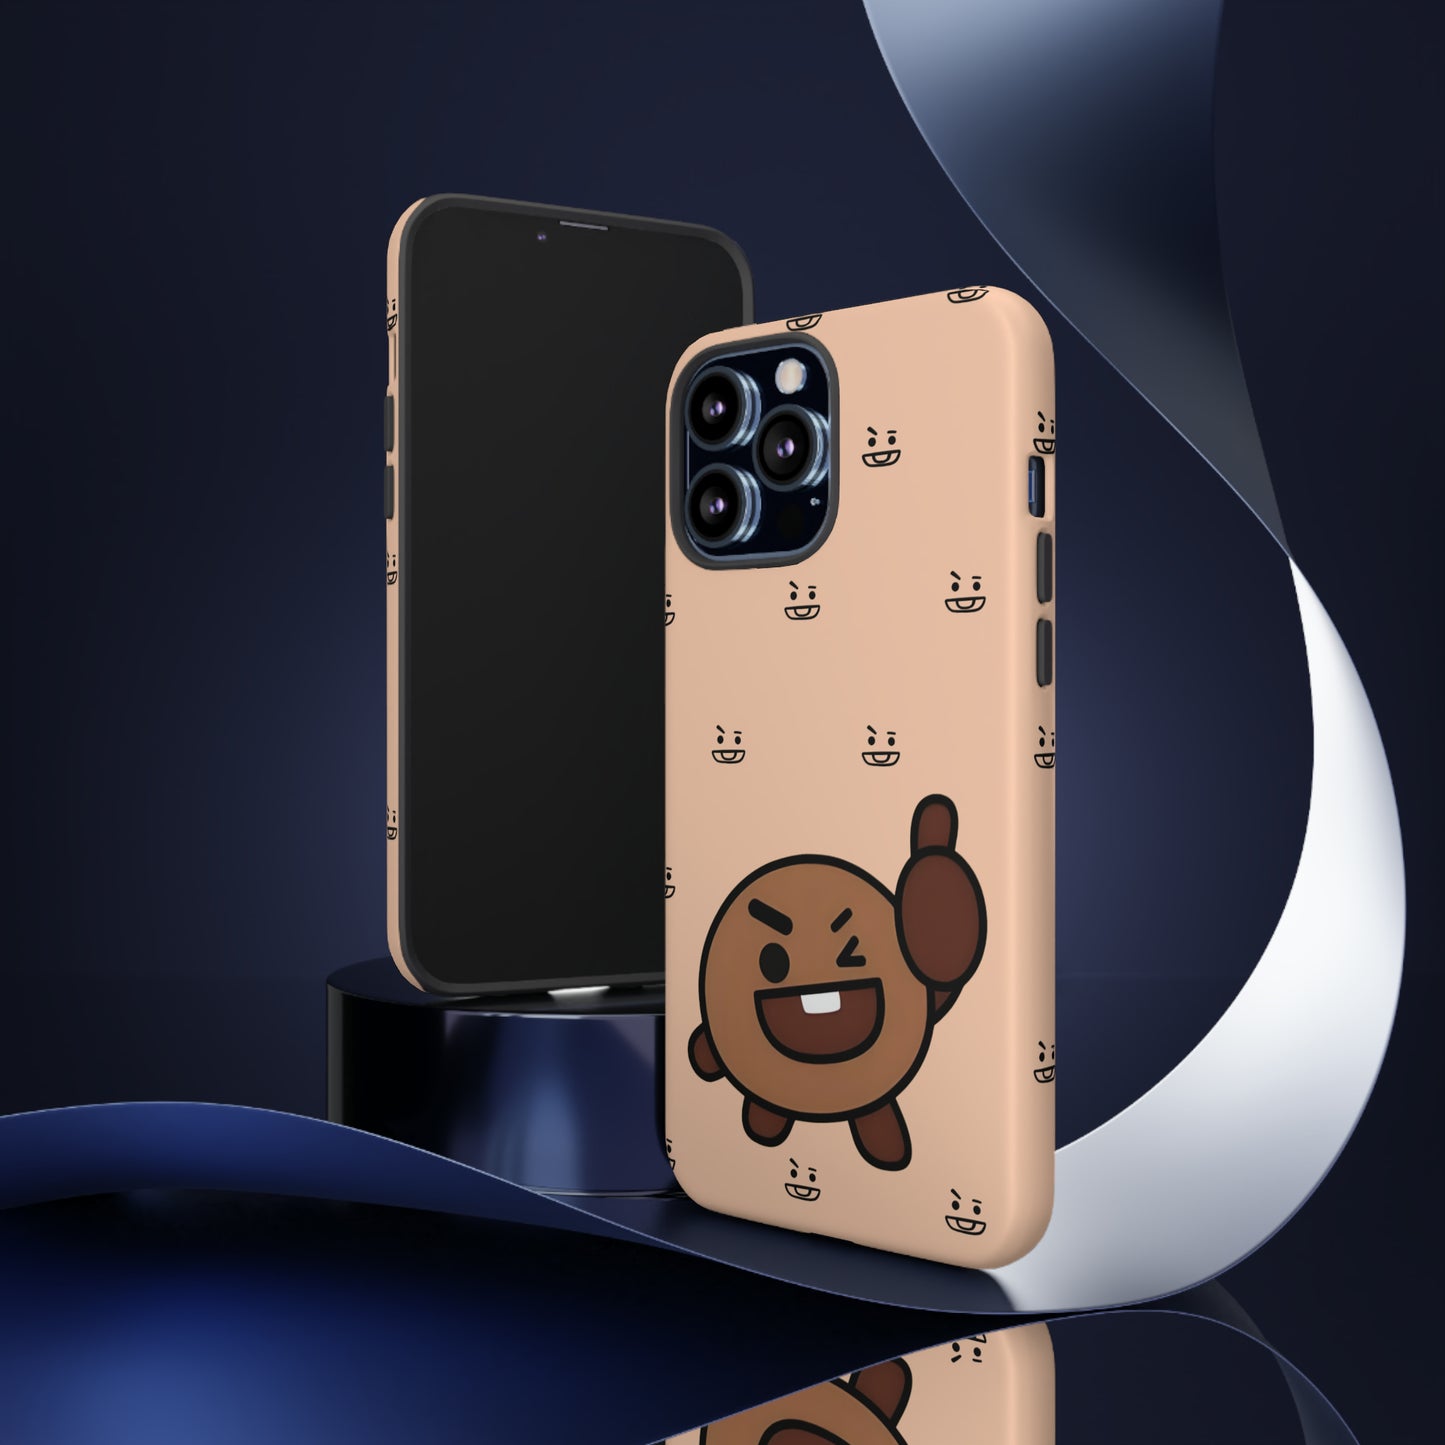 Shooky Iphone Cases